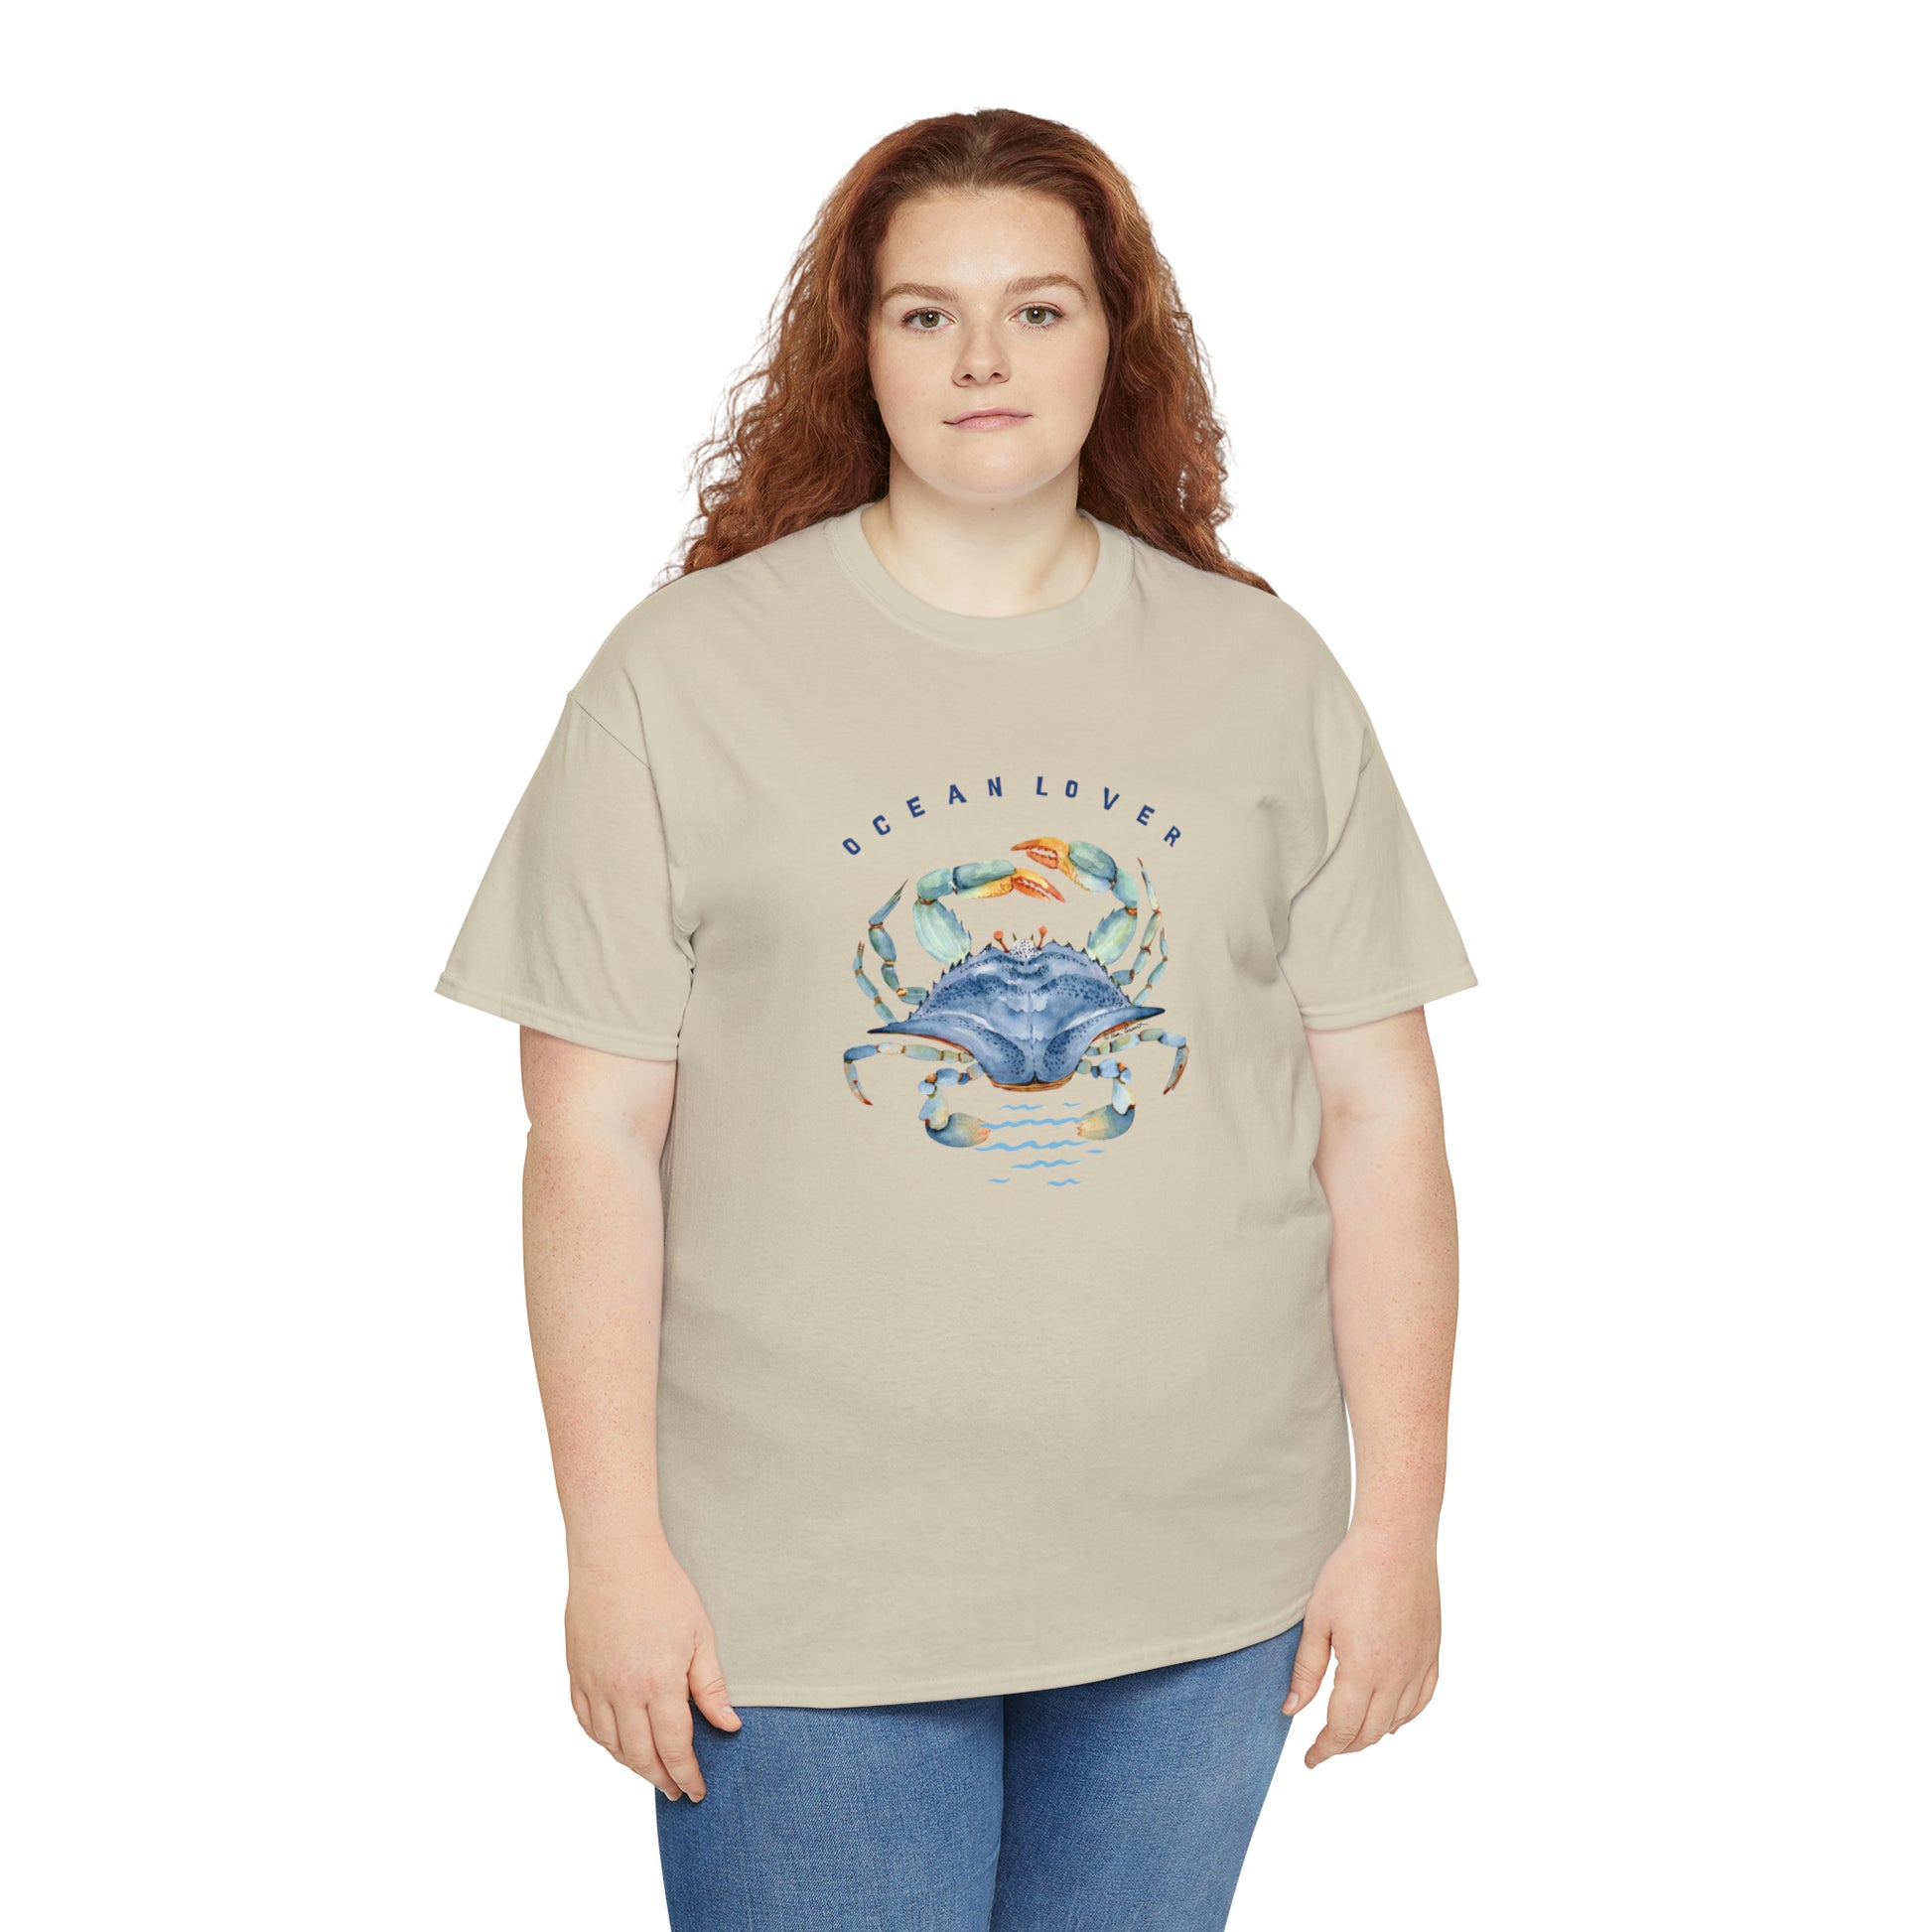 Plus size woman with auburn-colored hair wearing the Sand colored shirt